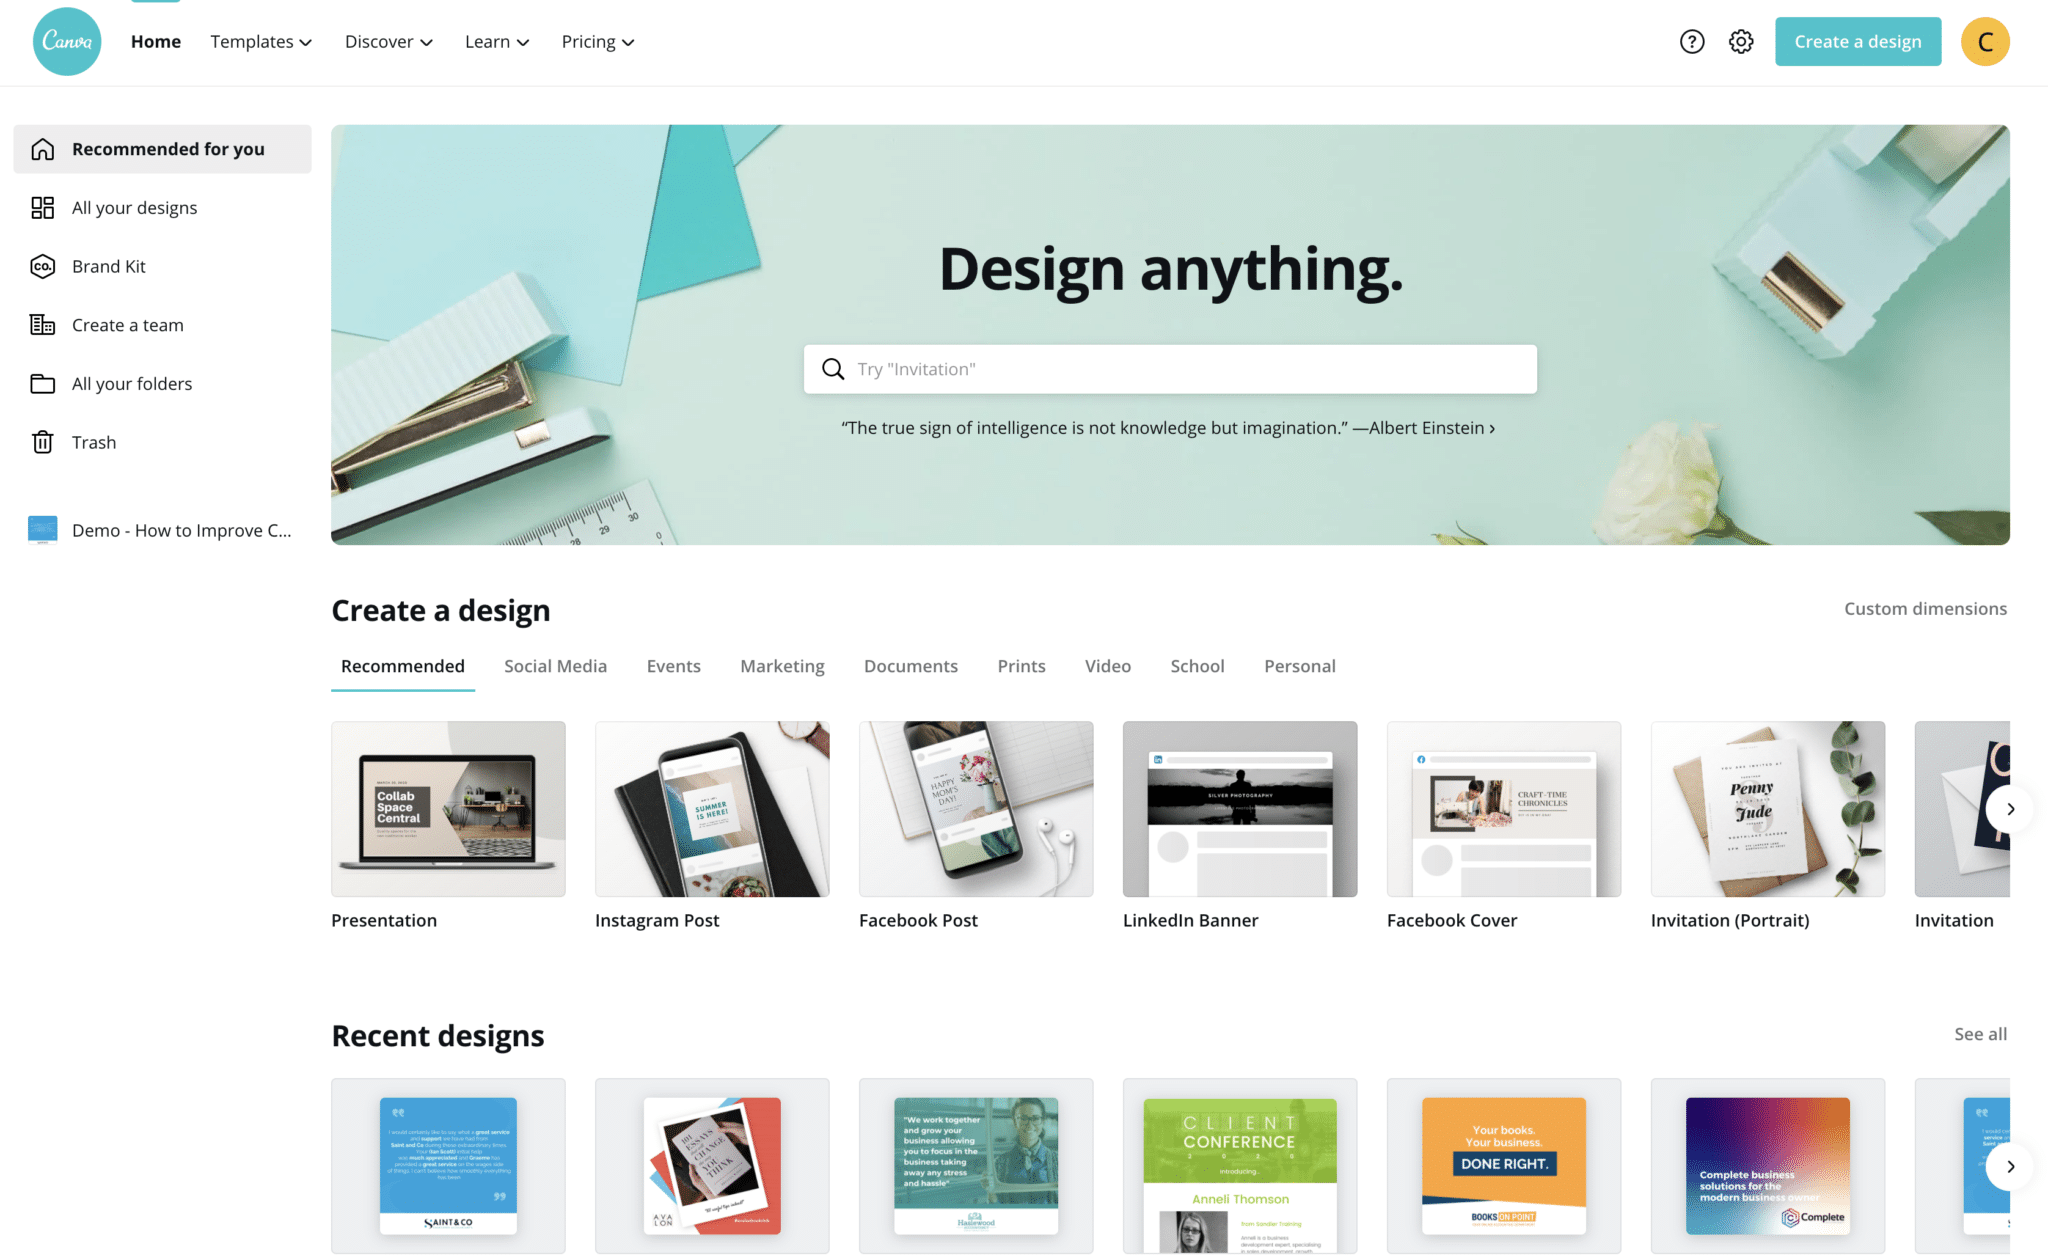 Screenshot of Canva home page